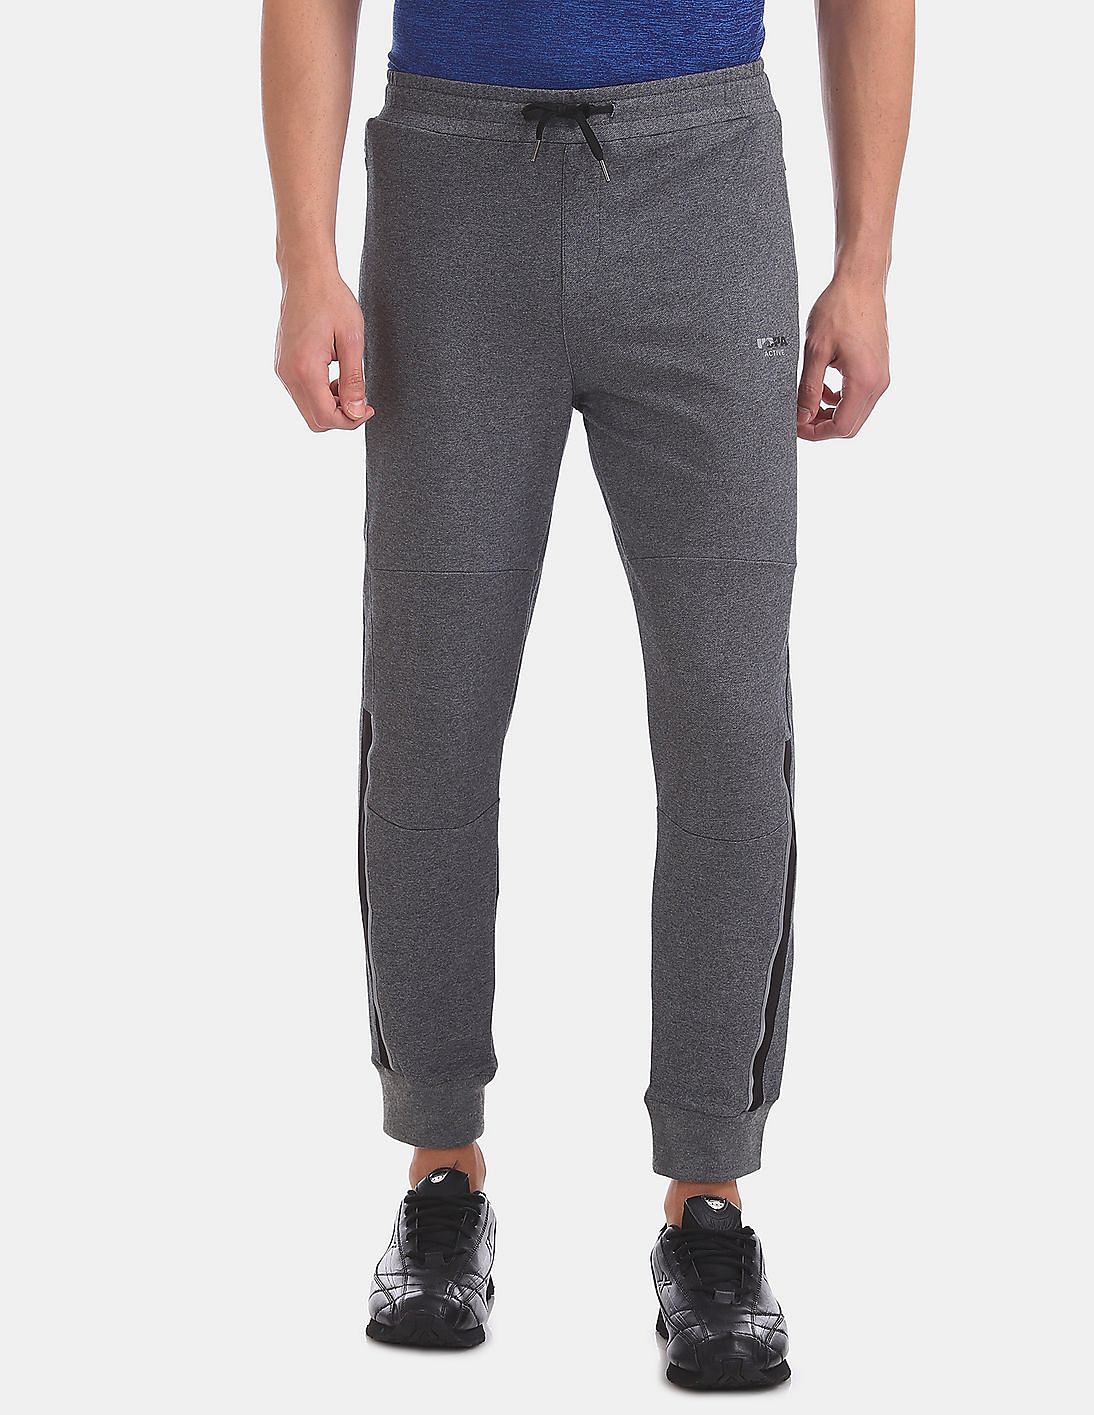 Buy Men Standard Fit Equi Dry Joggers online at NNNOW.com